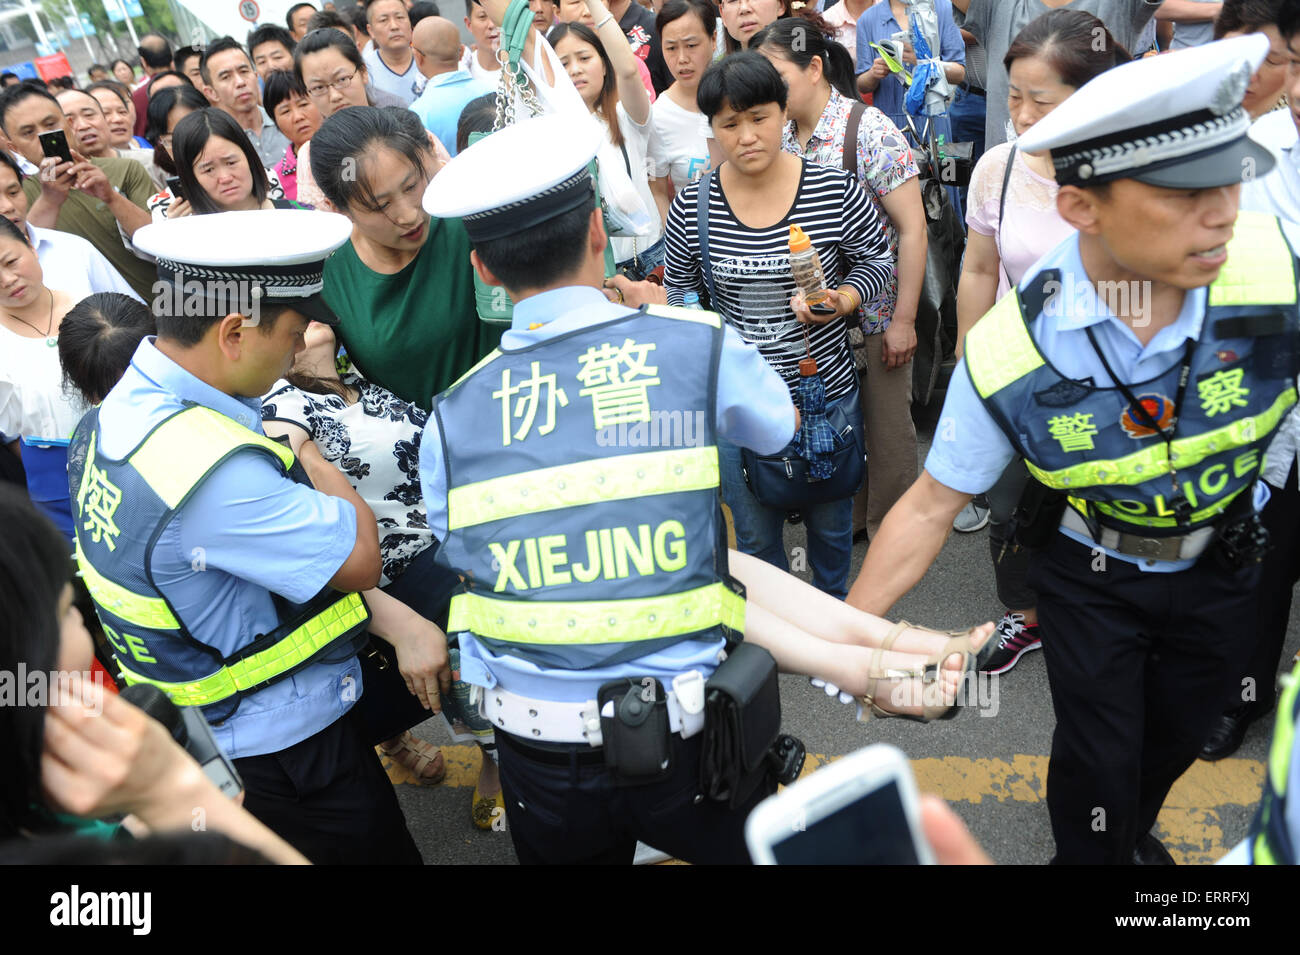 Jiaxing, China. 07th June, 2015. Policemen rescue a woman who fell in a faint when she was  waiting for  to the candidates taking an exam for the national college entrance  at a school in Hefei, Anhui province, east China on 7th  June , 2015. The two-day exams began on Sunday, with 9.42 million students attending to take the exams this year. Credit:  Panda Eye/Alamy Live News Stock Photo